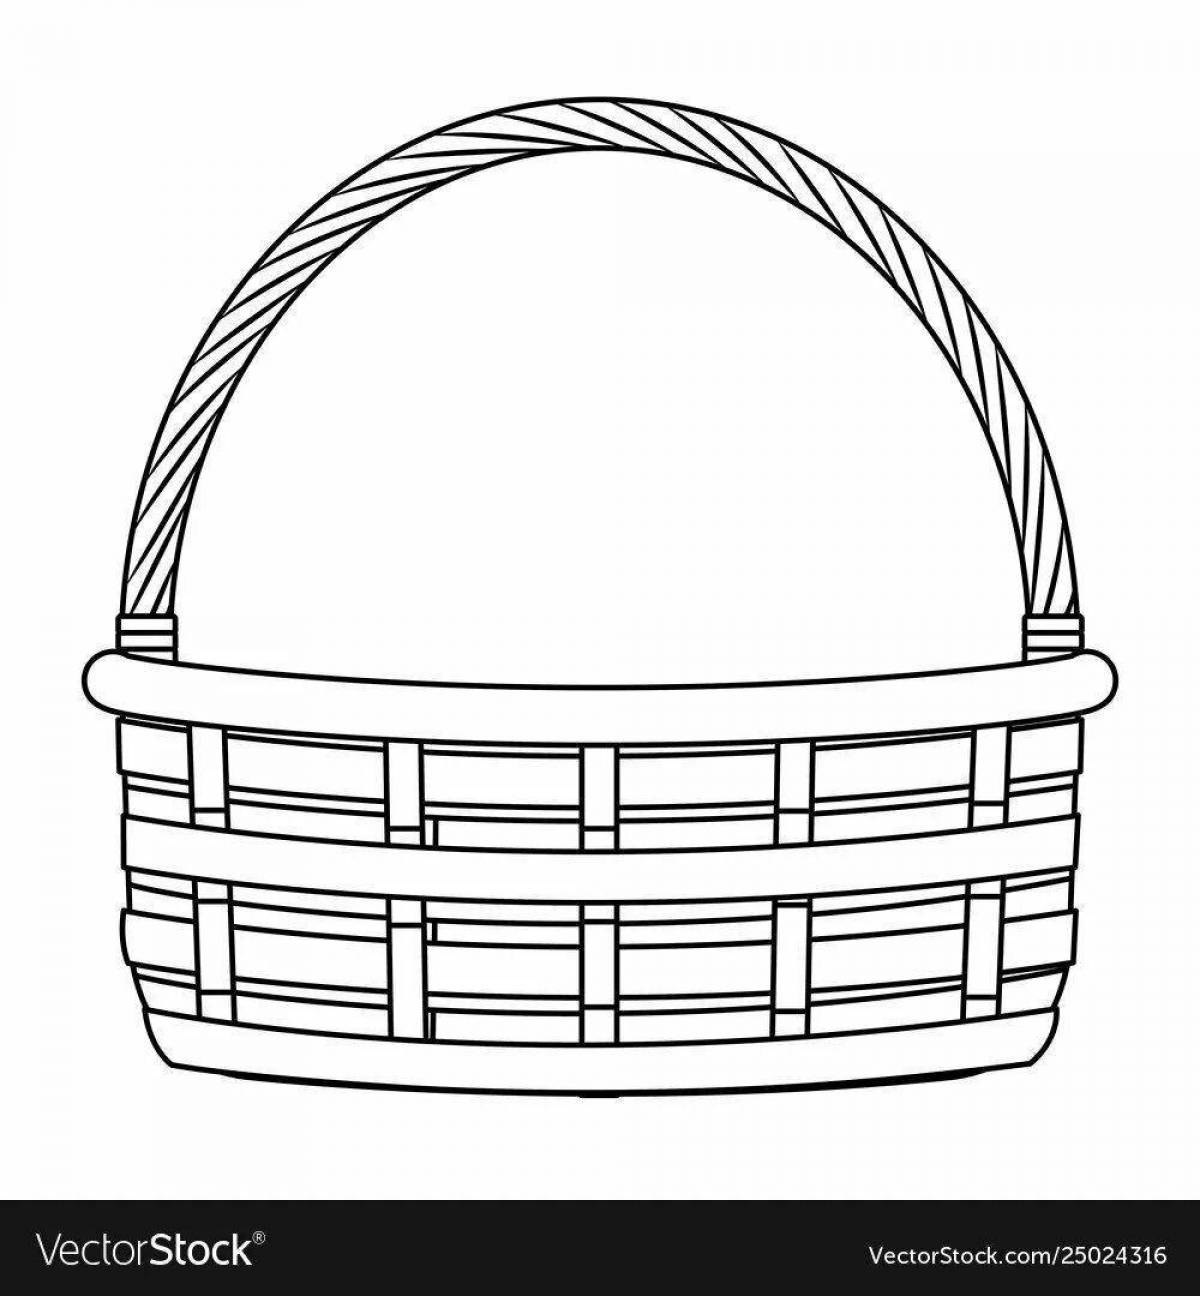 Exquisite empty basket coloring book for kids